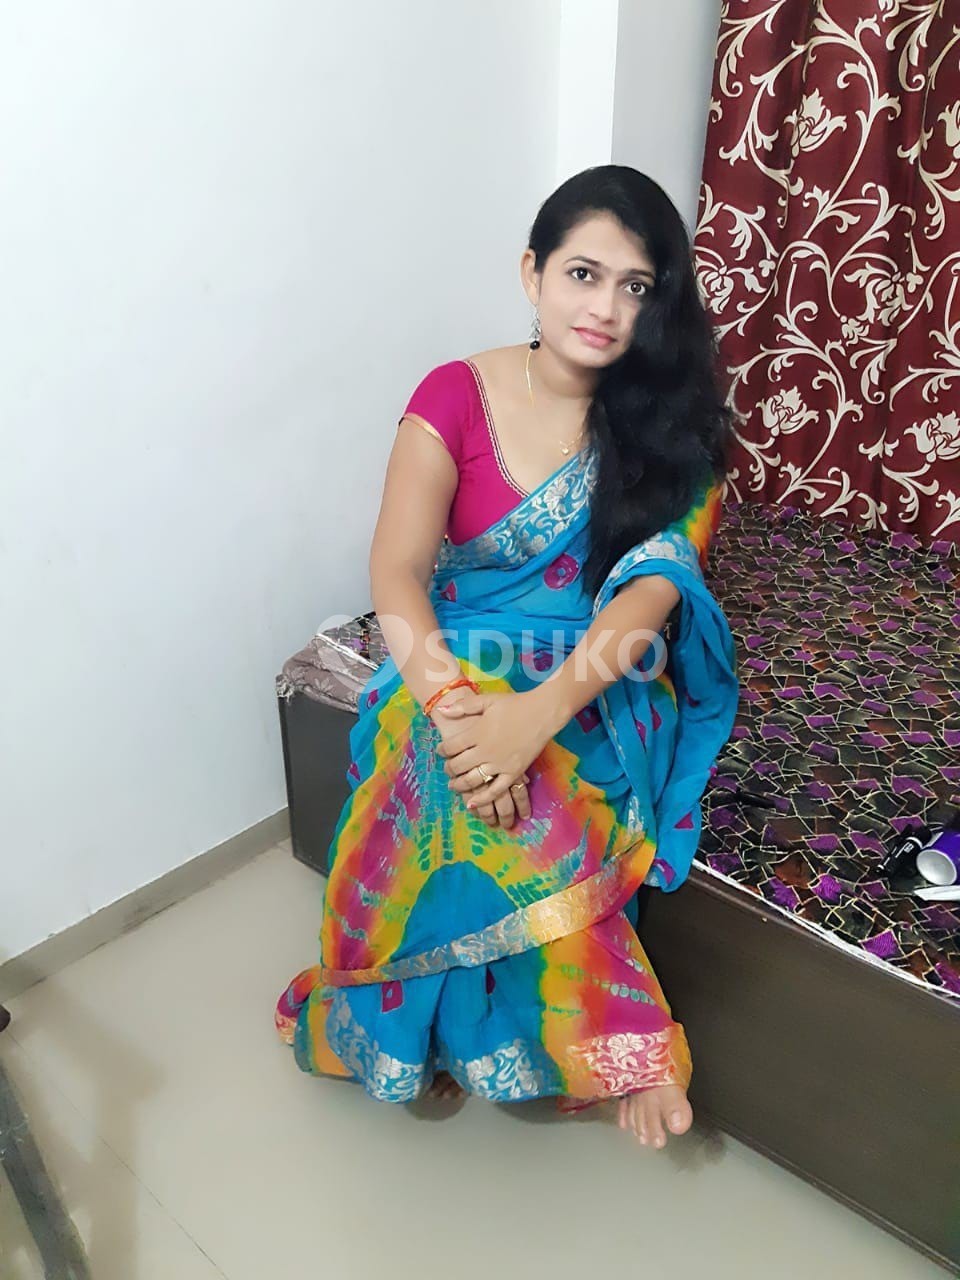 Panipat myself Malika..TODAY LOW PRICE 100%BEST HOT GIRLS SAFE AND SECURE GENUINE CALL GIRL AFFORDABLE PRICE BOTH OF YOU